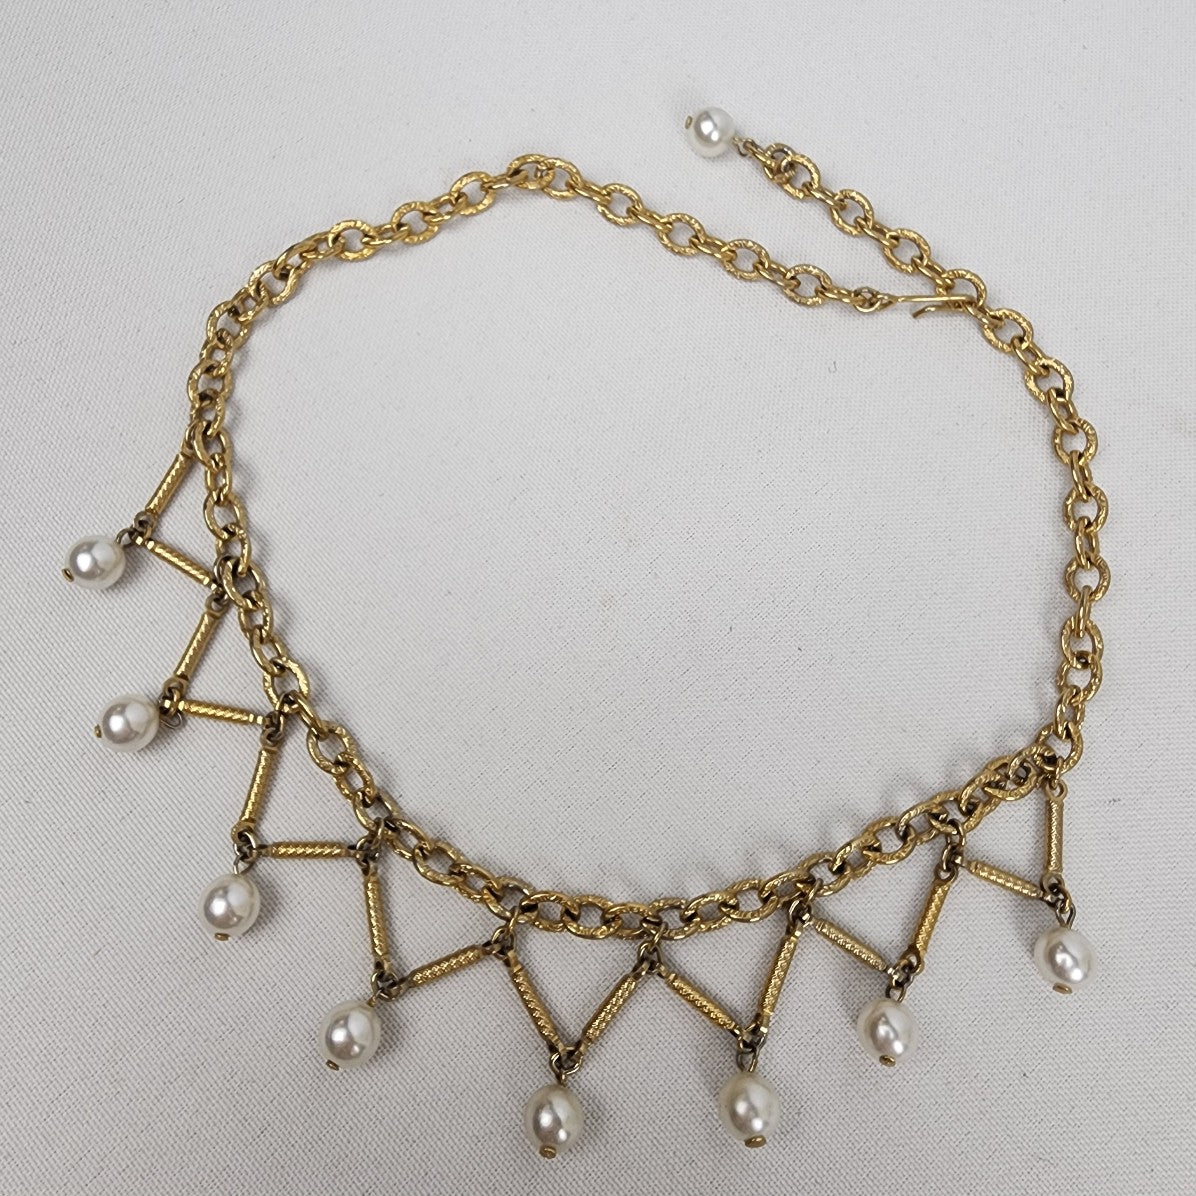 Vintage Gold Tone Dangle Faux Pearl Collar Necklace